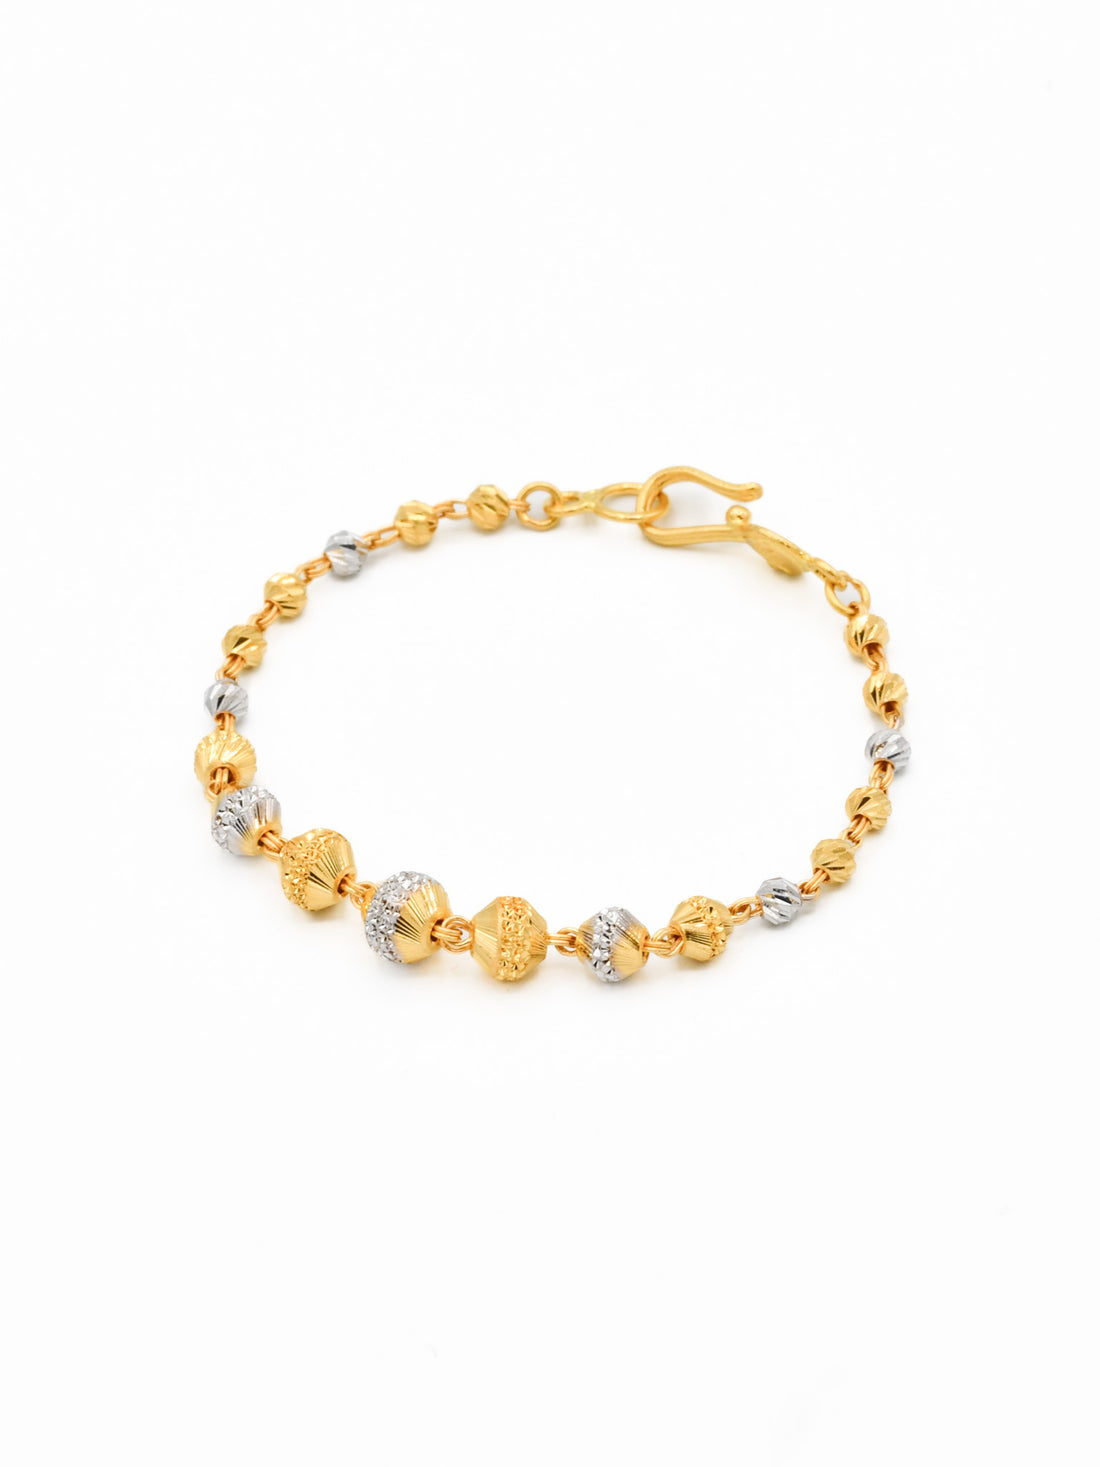 22ct Gold Two Tone Ball 1 PC Baby Bracelet